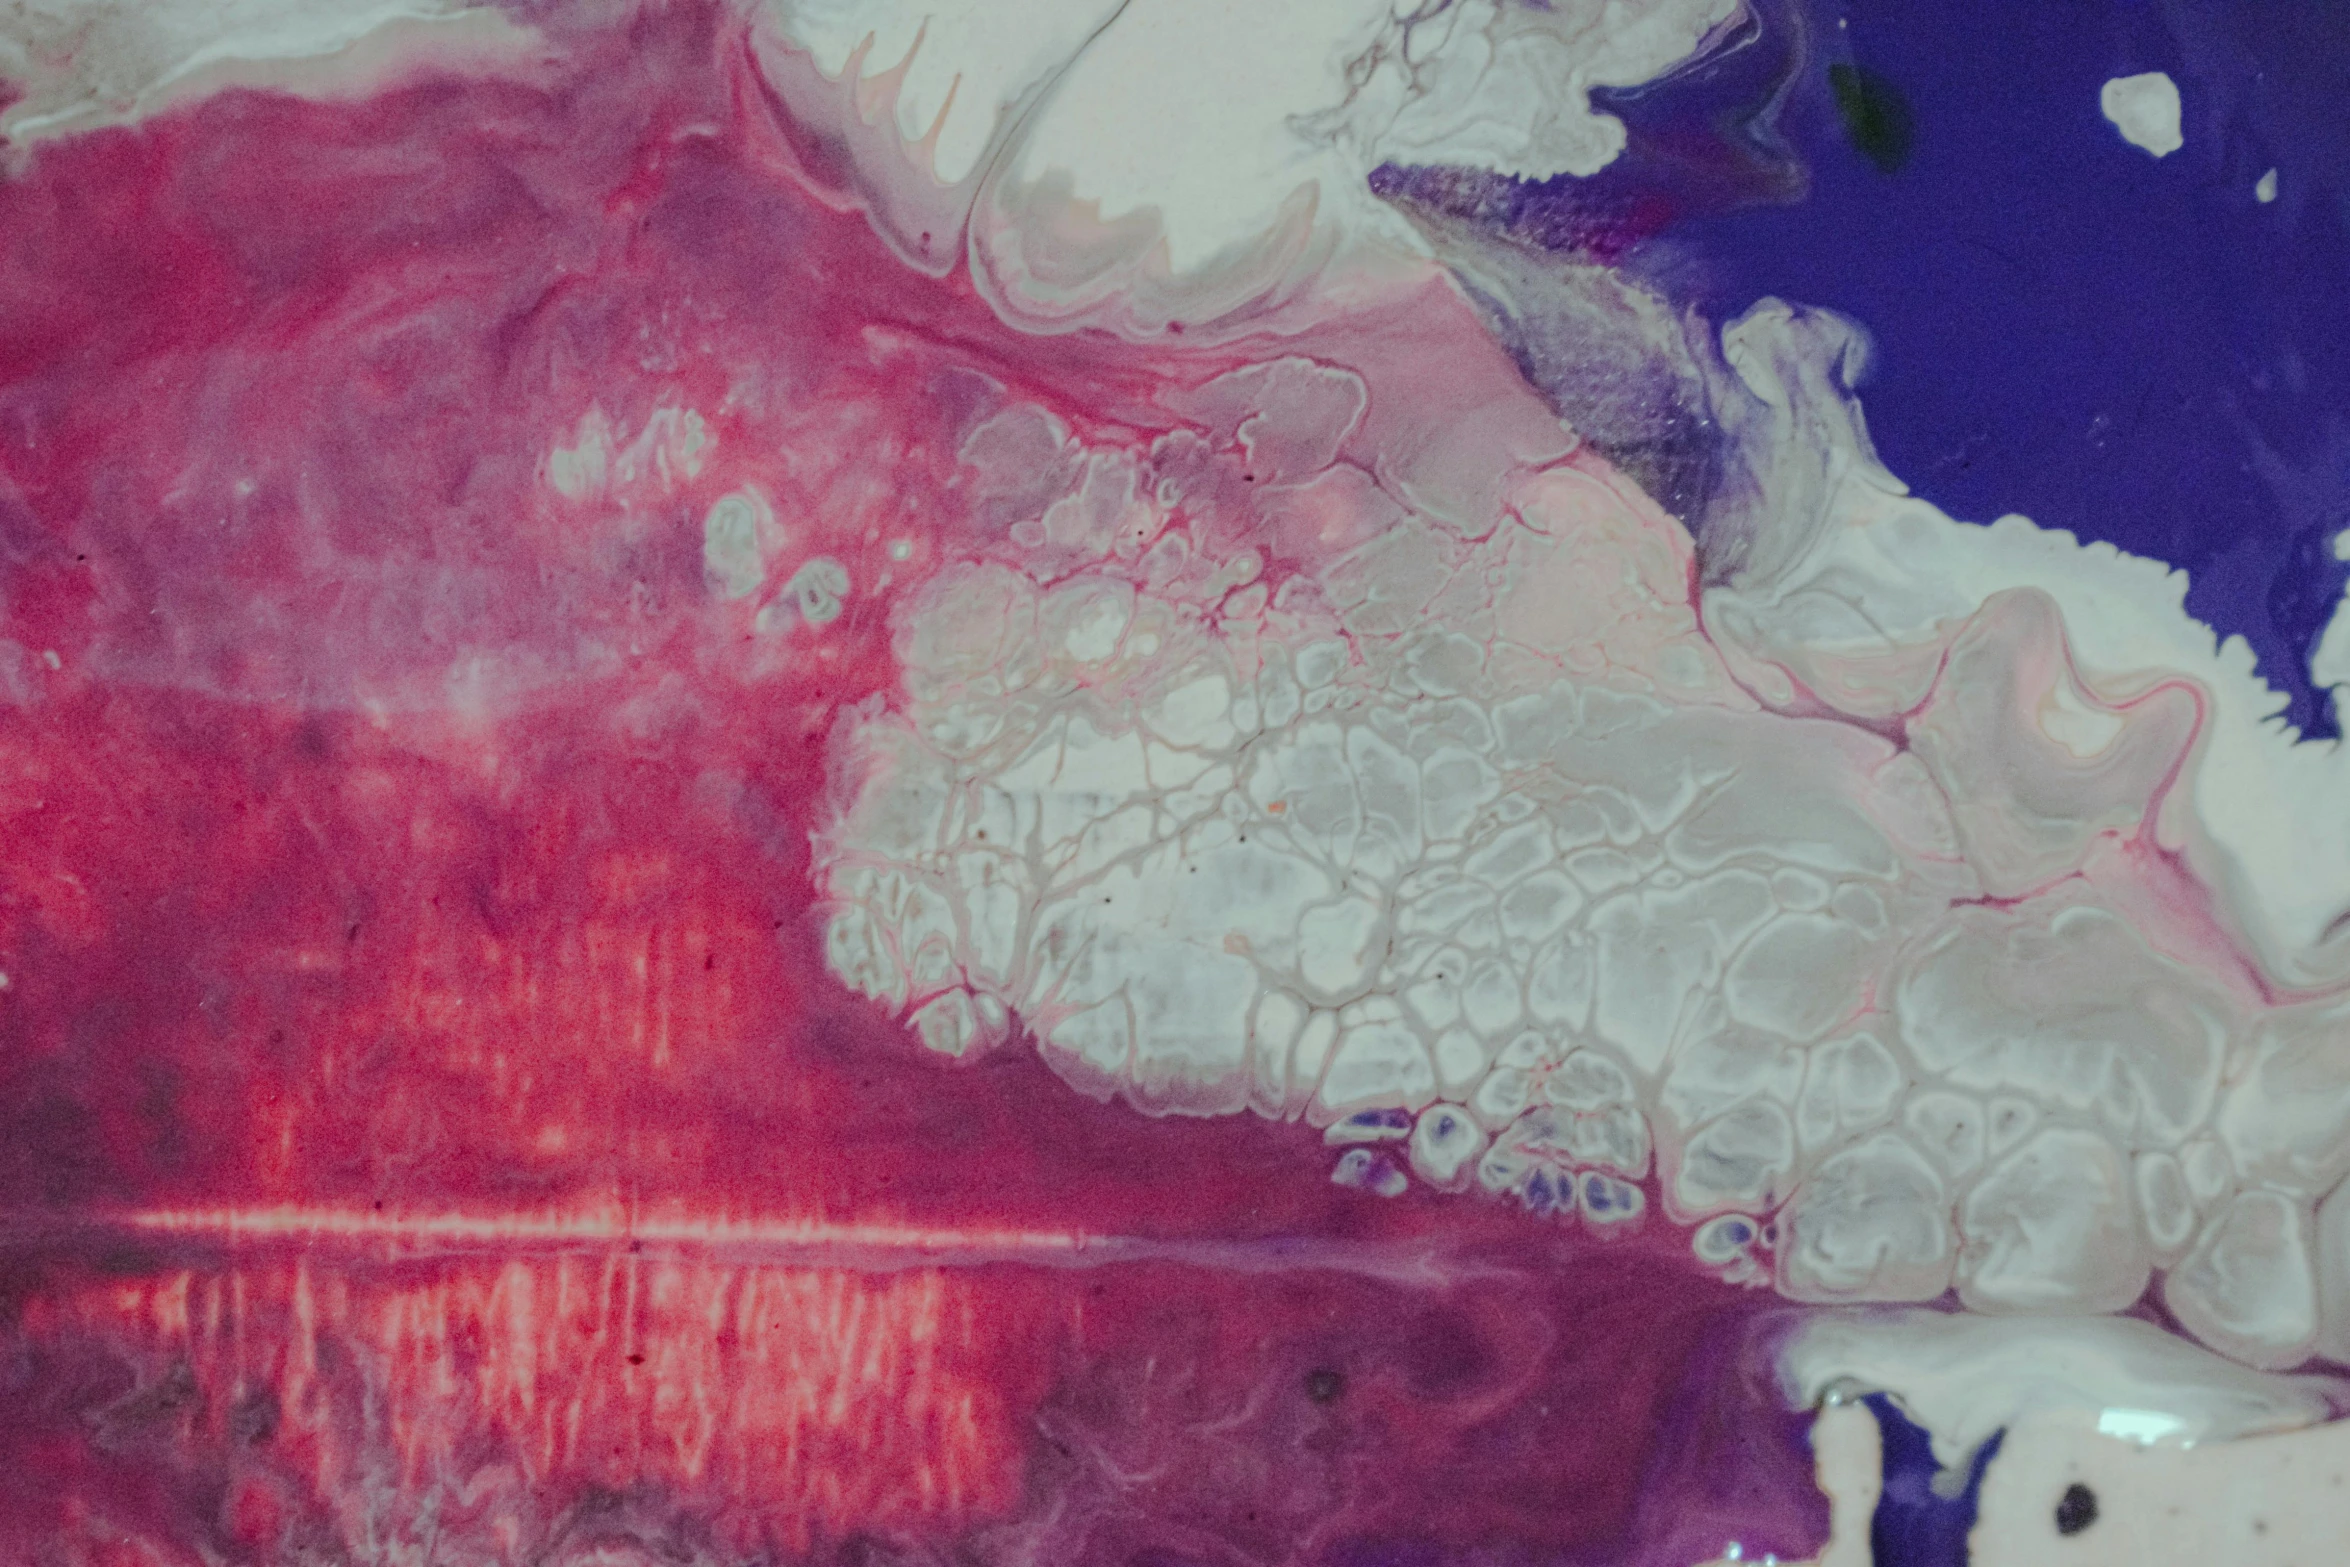 a close up of a plate of food on a table, inspired by Julian Schnabel, flickr, lyrical abstraction, swirly liquid fluid abstract art, pink and purple, 144x144 canvas, blue and white and red mist